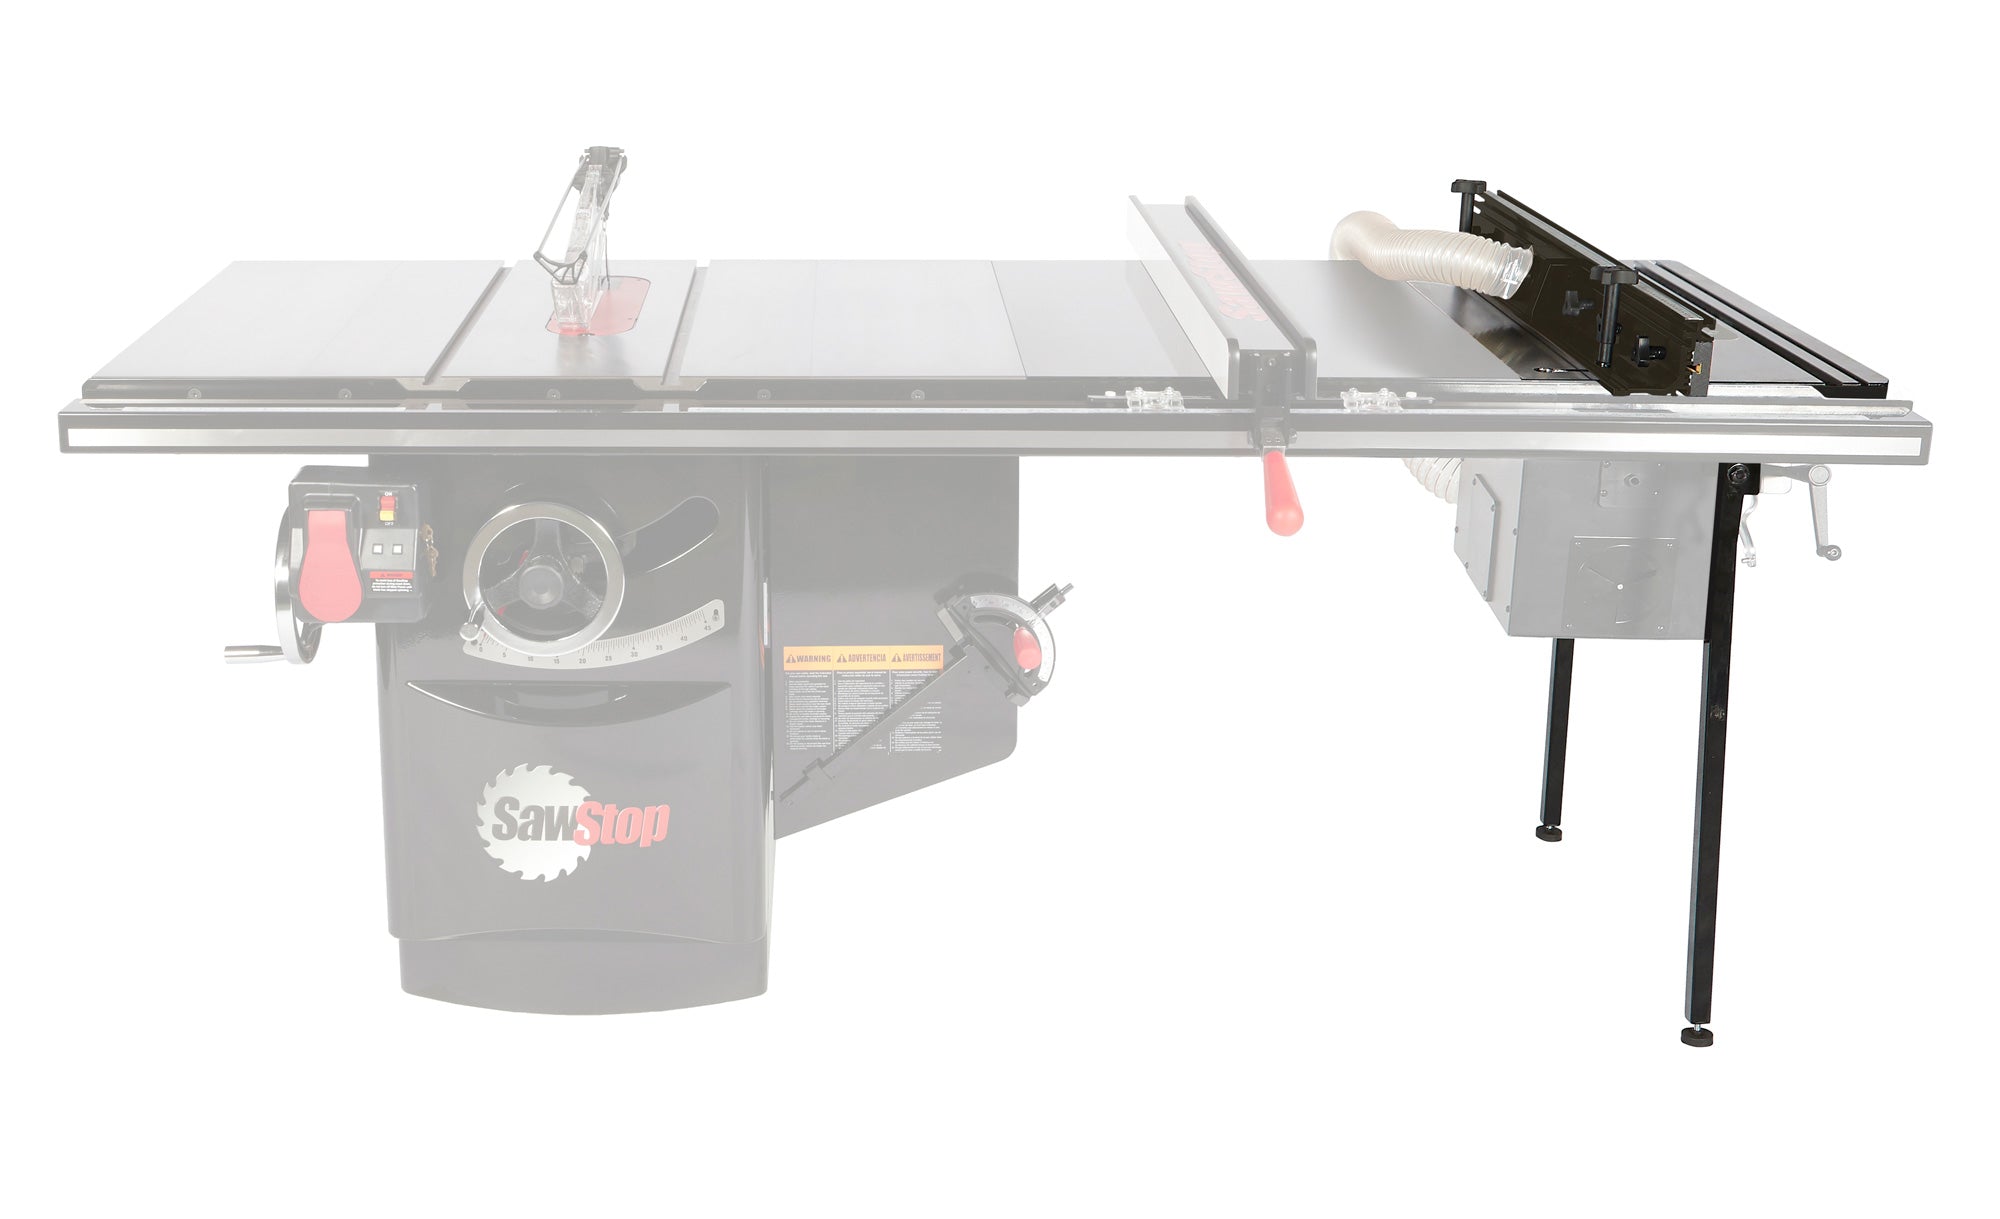 ICS 30" In-Line Router Table (RT-F32, RT-PSW, RT-ST2, RT-C30)